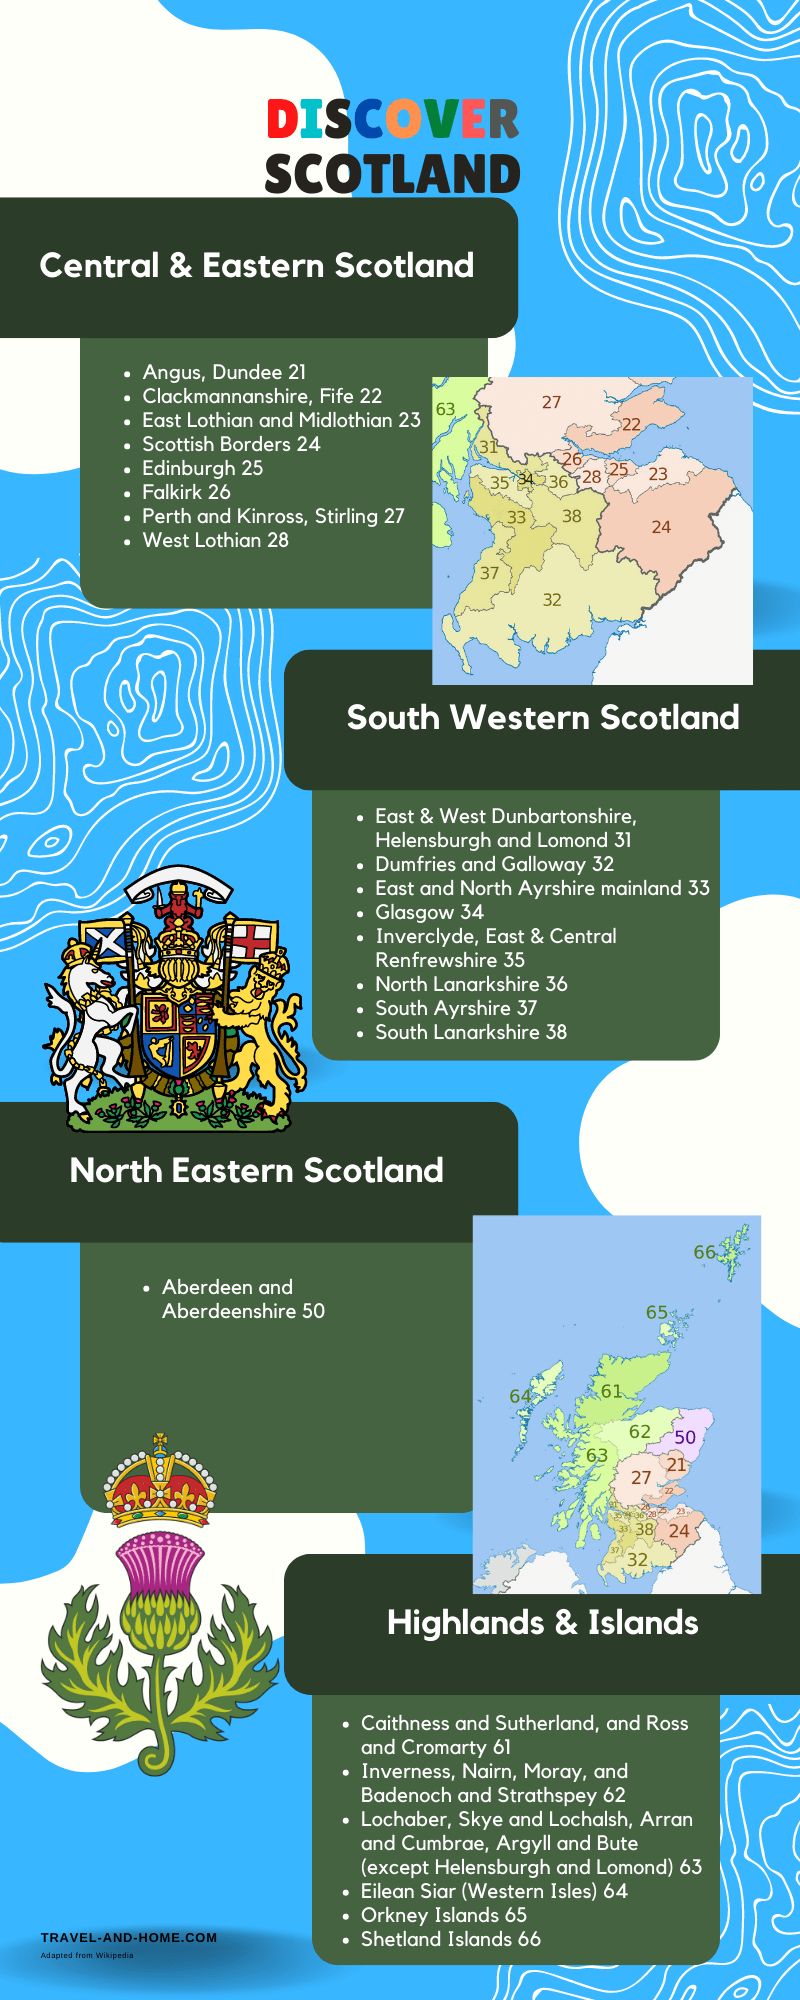 Discover Scotland Map regions Highlands and Islands Eastern Scotland South Western Scotland North Eastern Scotland min